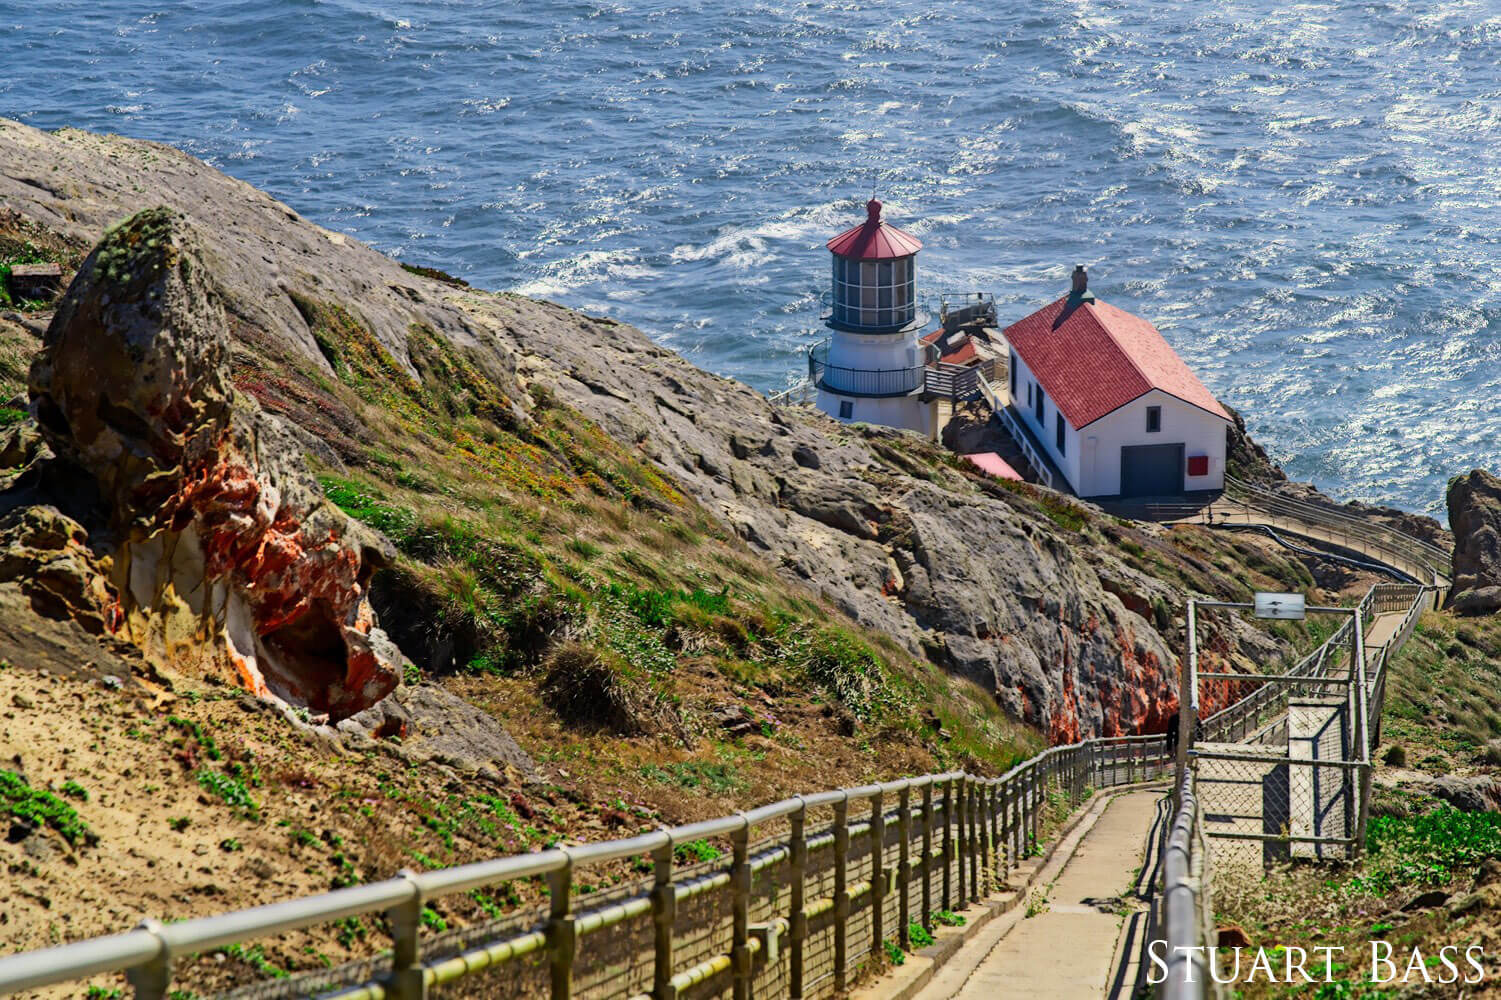 A path leading to a lighthouse overlooking the ocean.